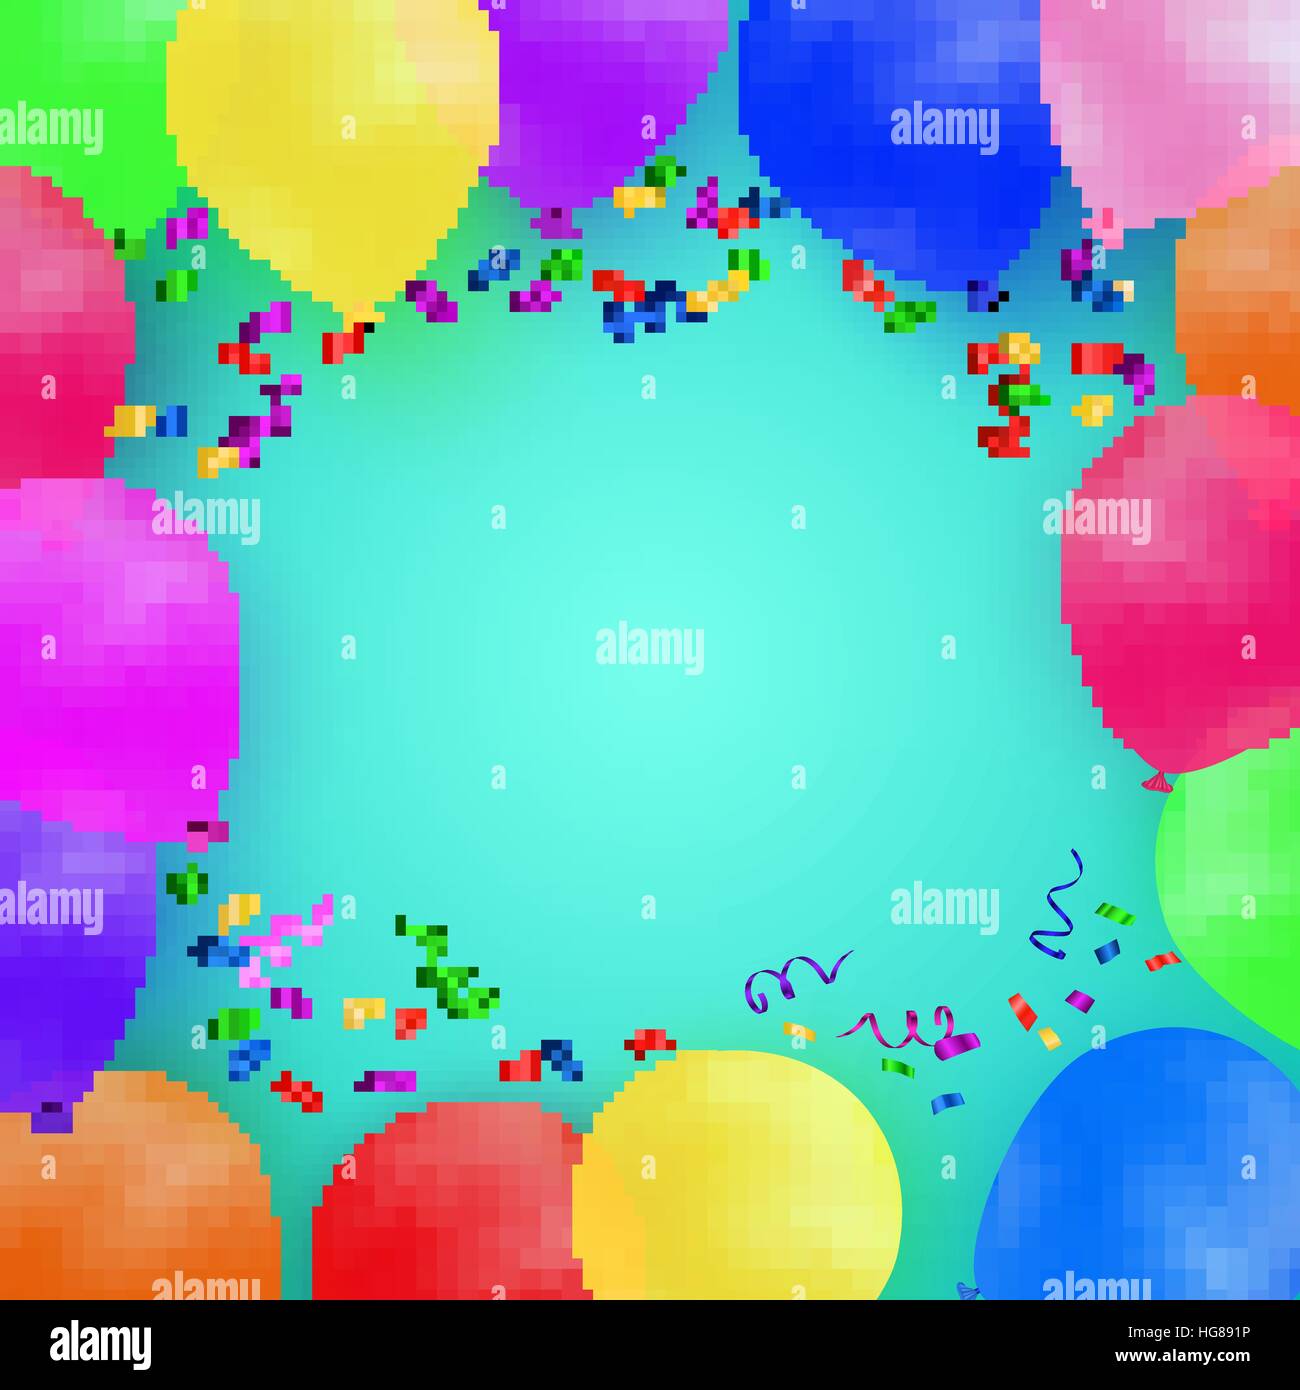 Celebrating background with colorful balloons and confetti. Stock Vector